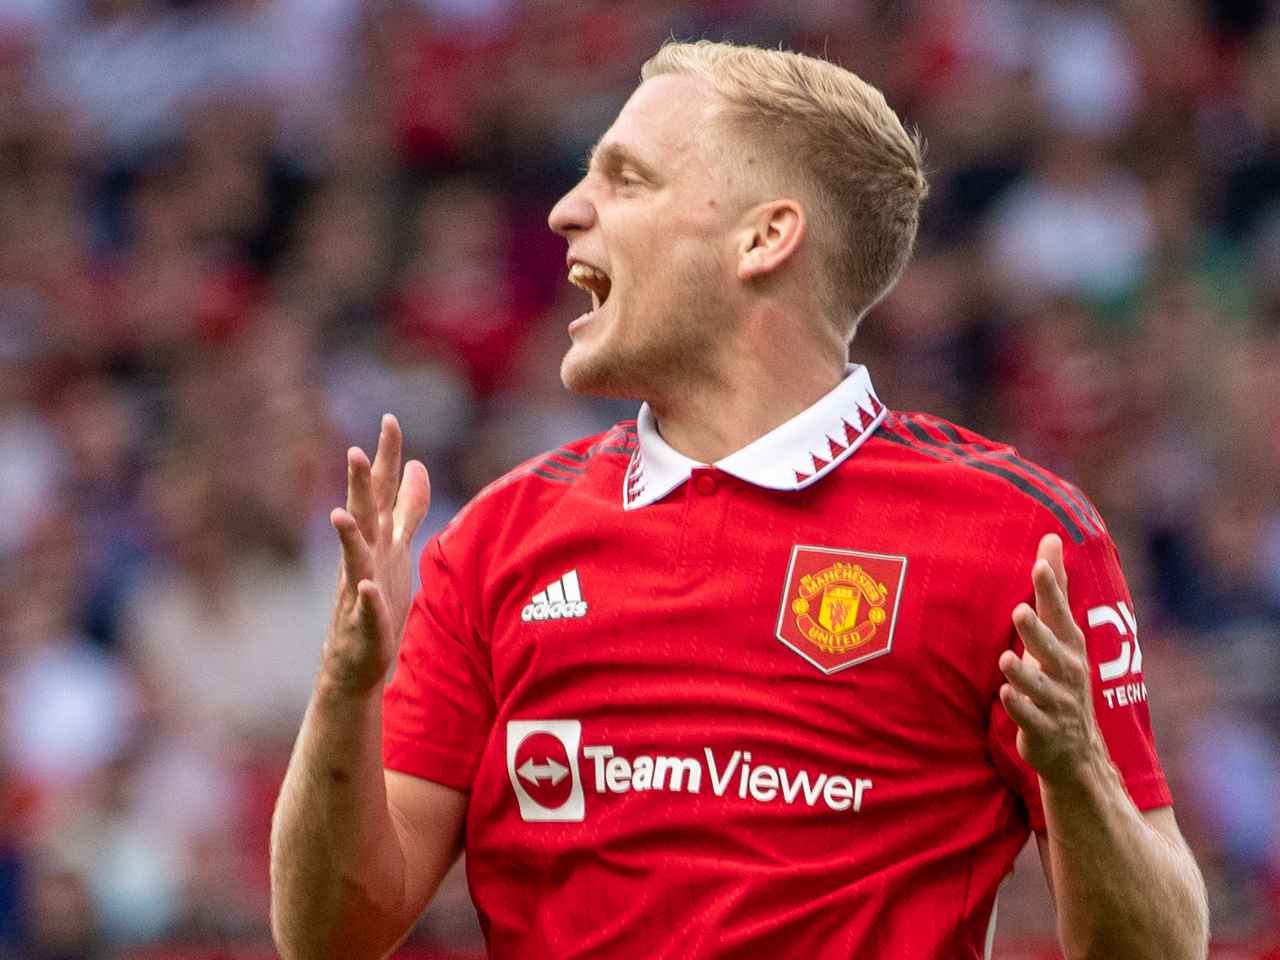 Man Utd injury blow with Donny Van de Beek out for SEASON after